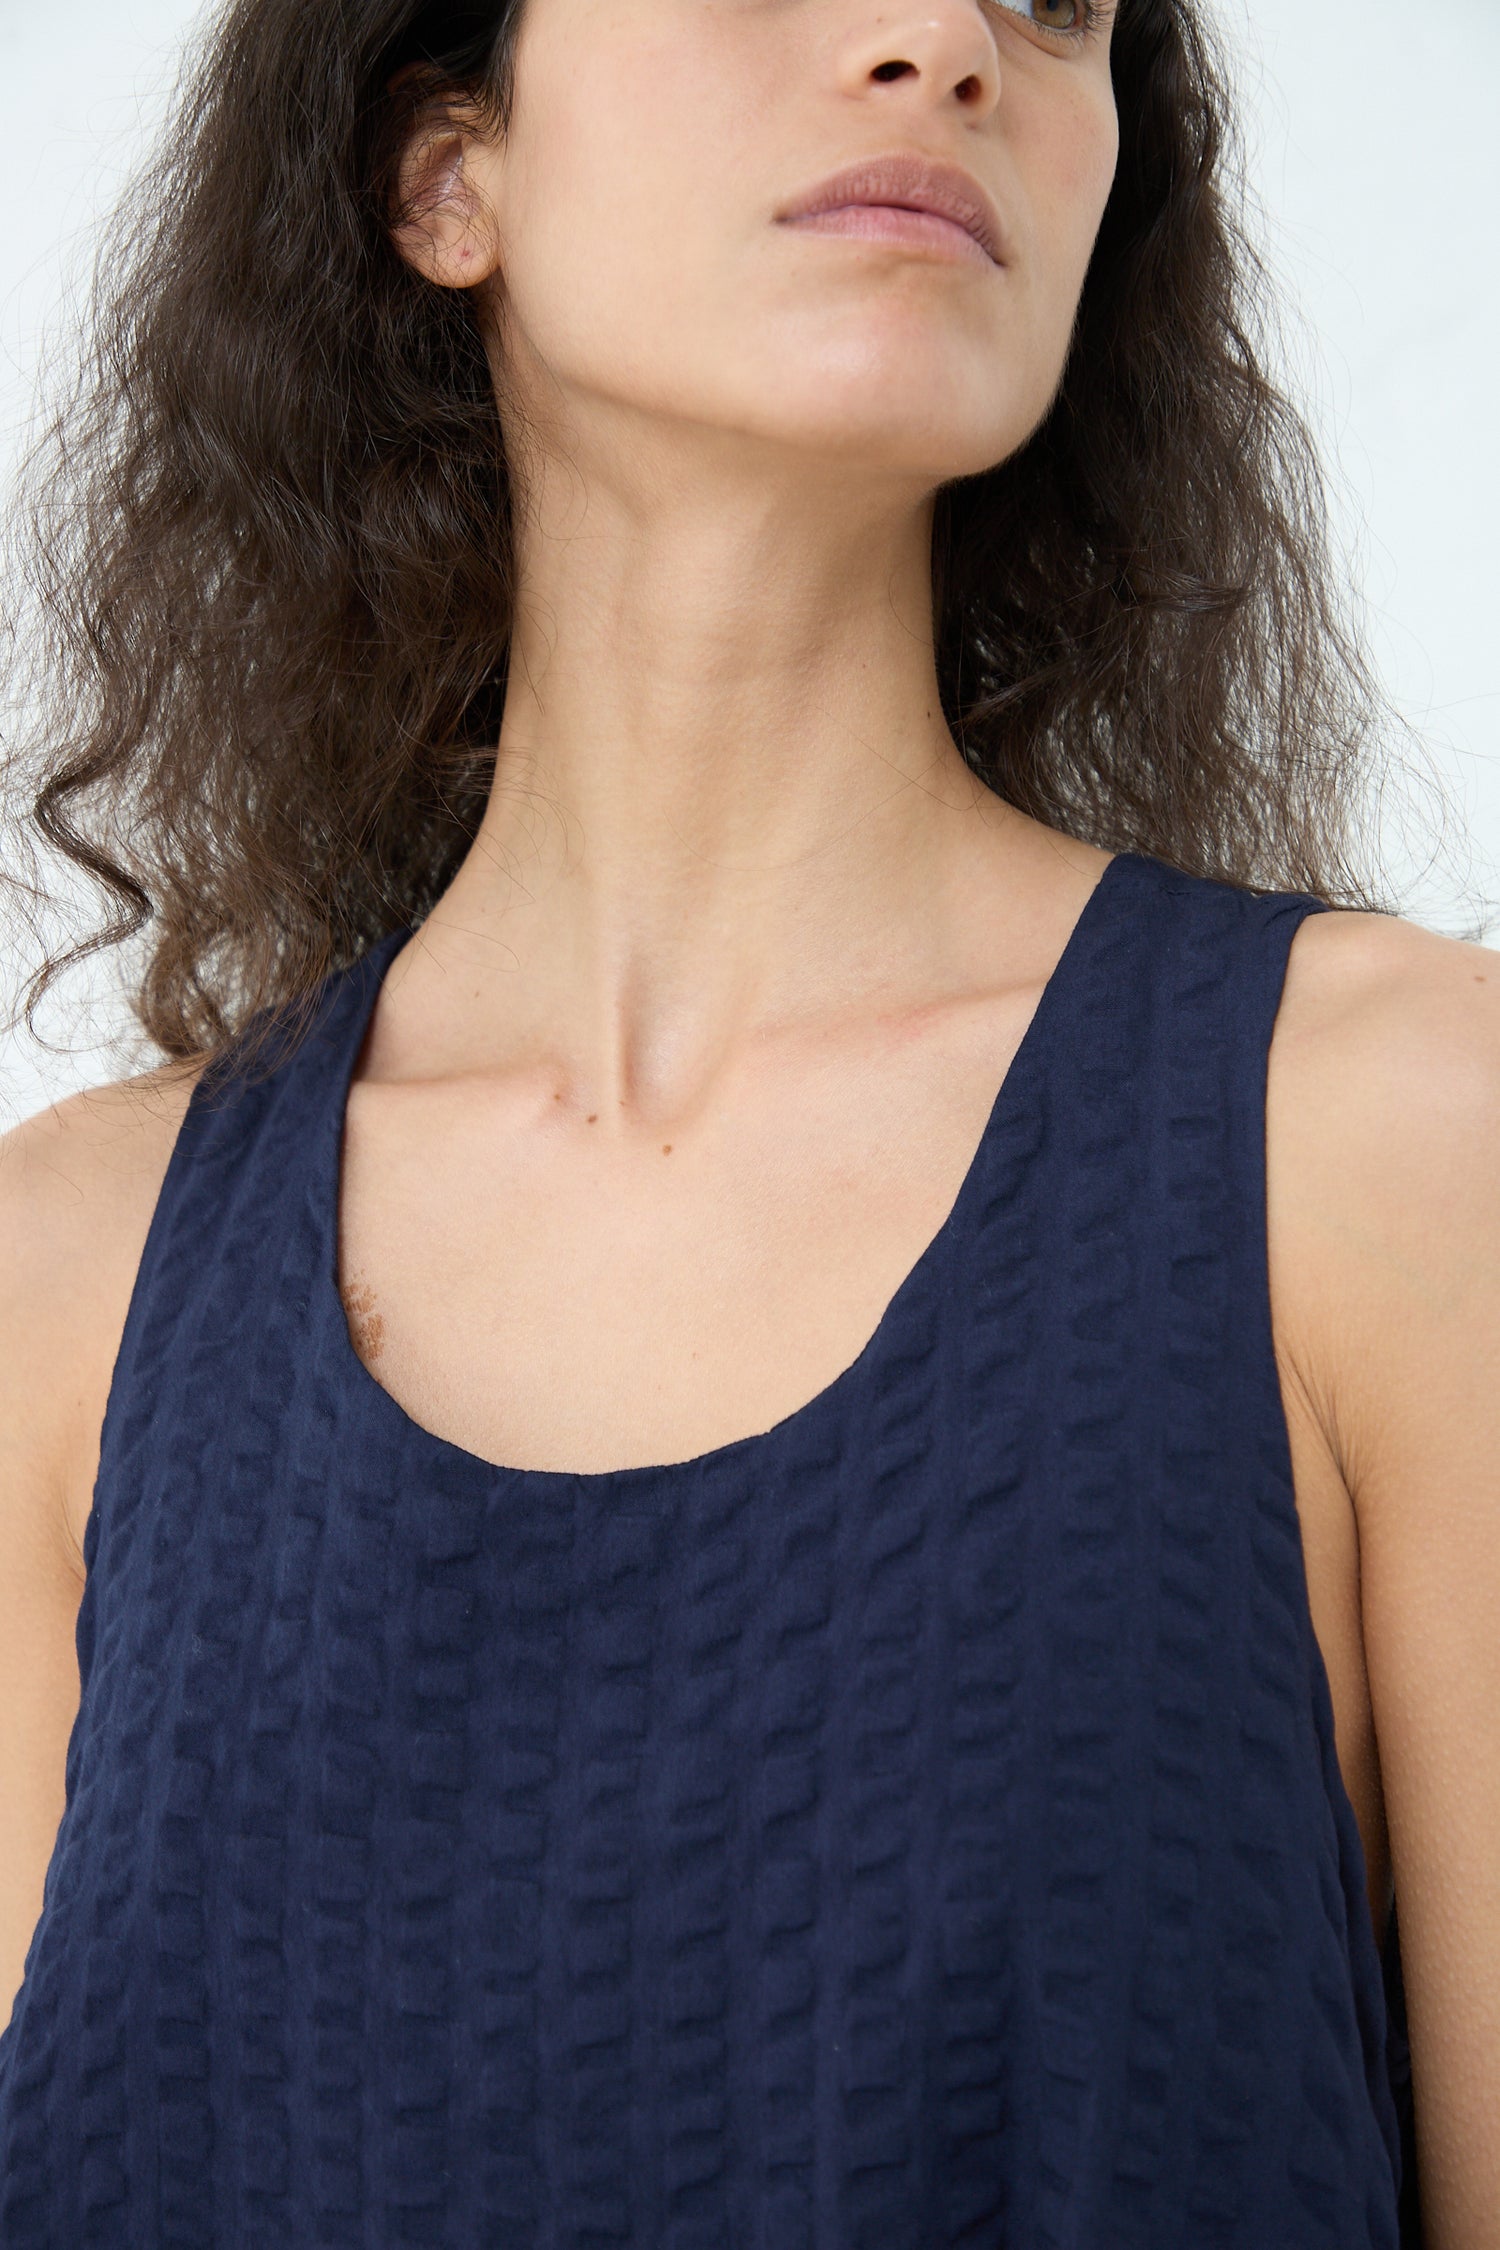 A woman wearing a Black Crane Cotton Seersucker Parachute Dress in Navy, showing her shoulders and collarbone area, with her face partially visible and her hair falling naturally.